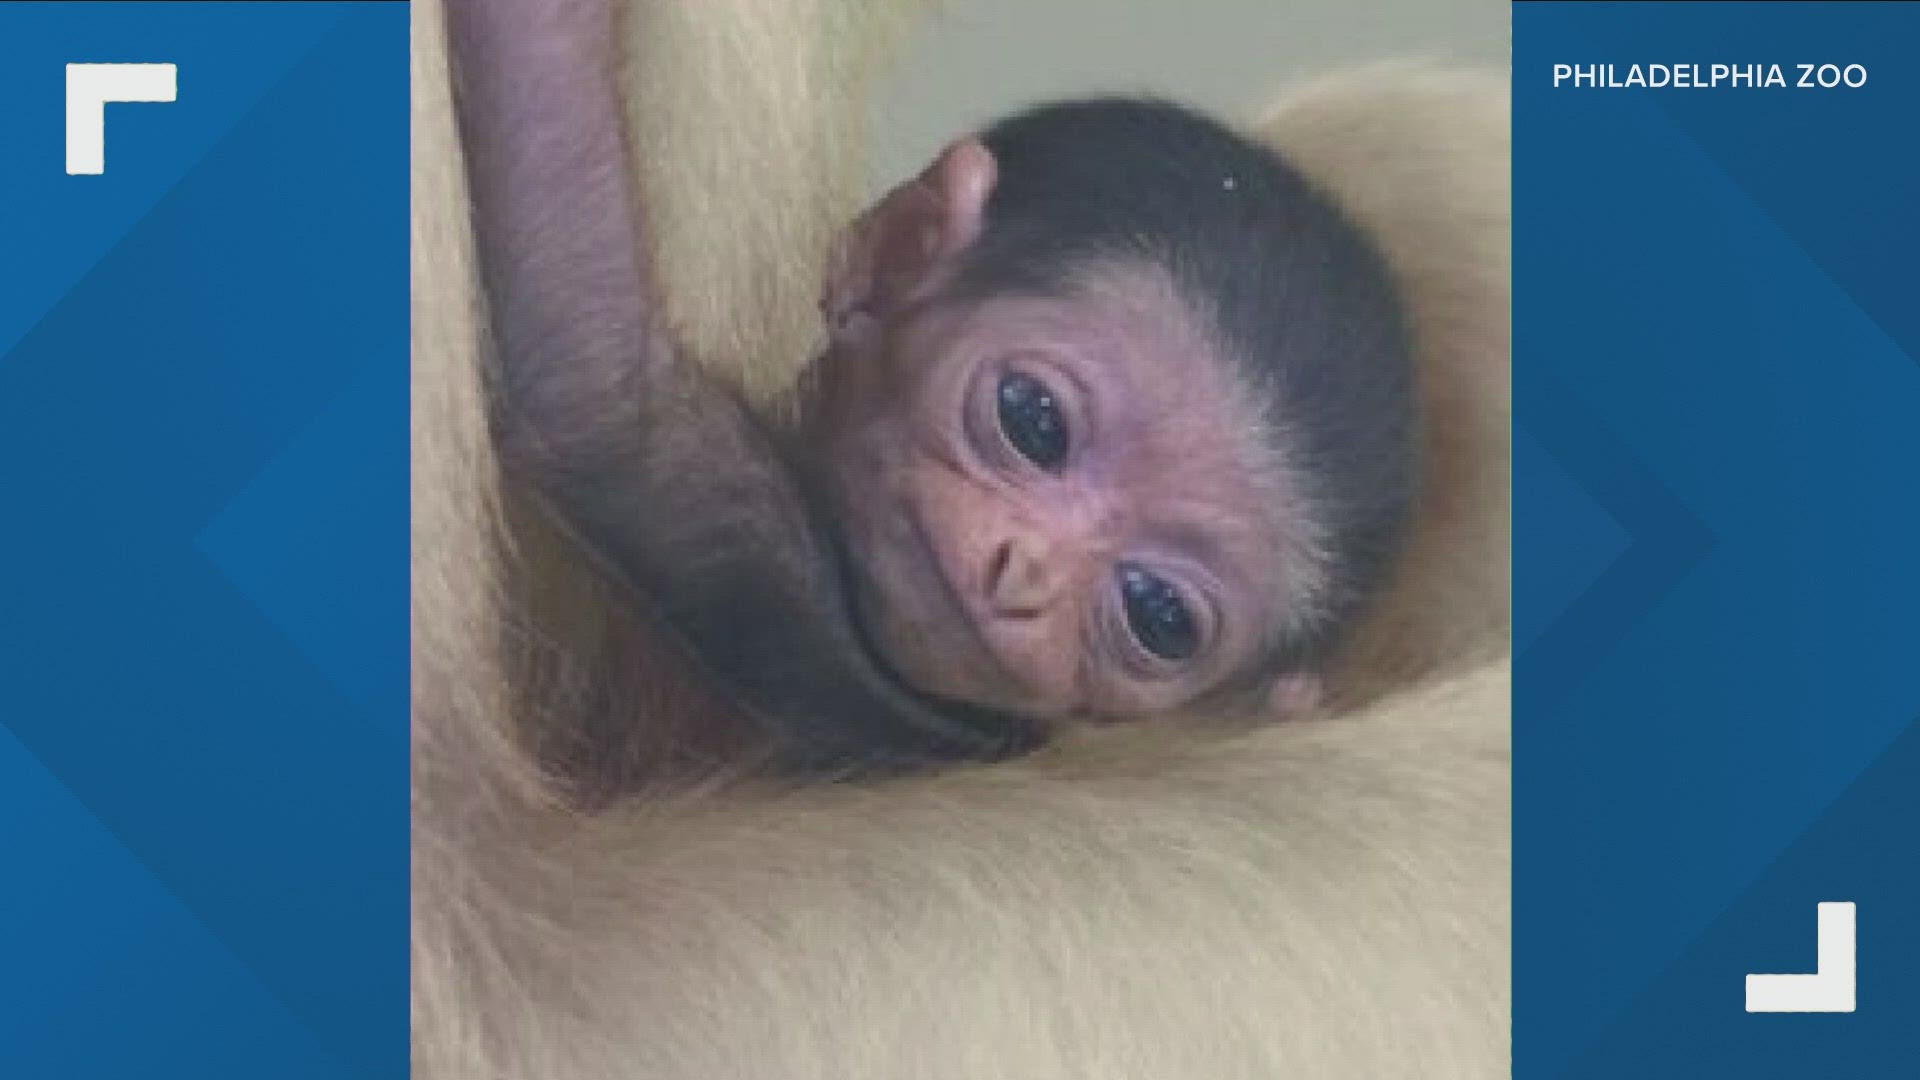 The primate's birth is part of a breeding program to ensure the survival of the endangered species and maintain a genetically diverse population.